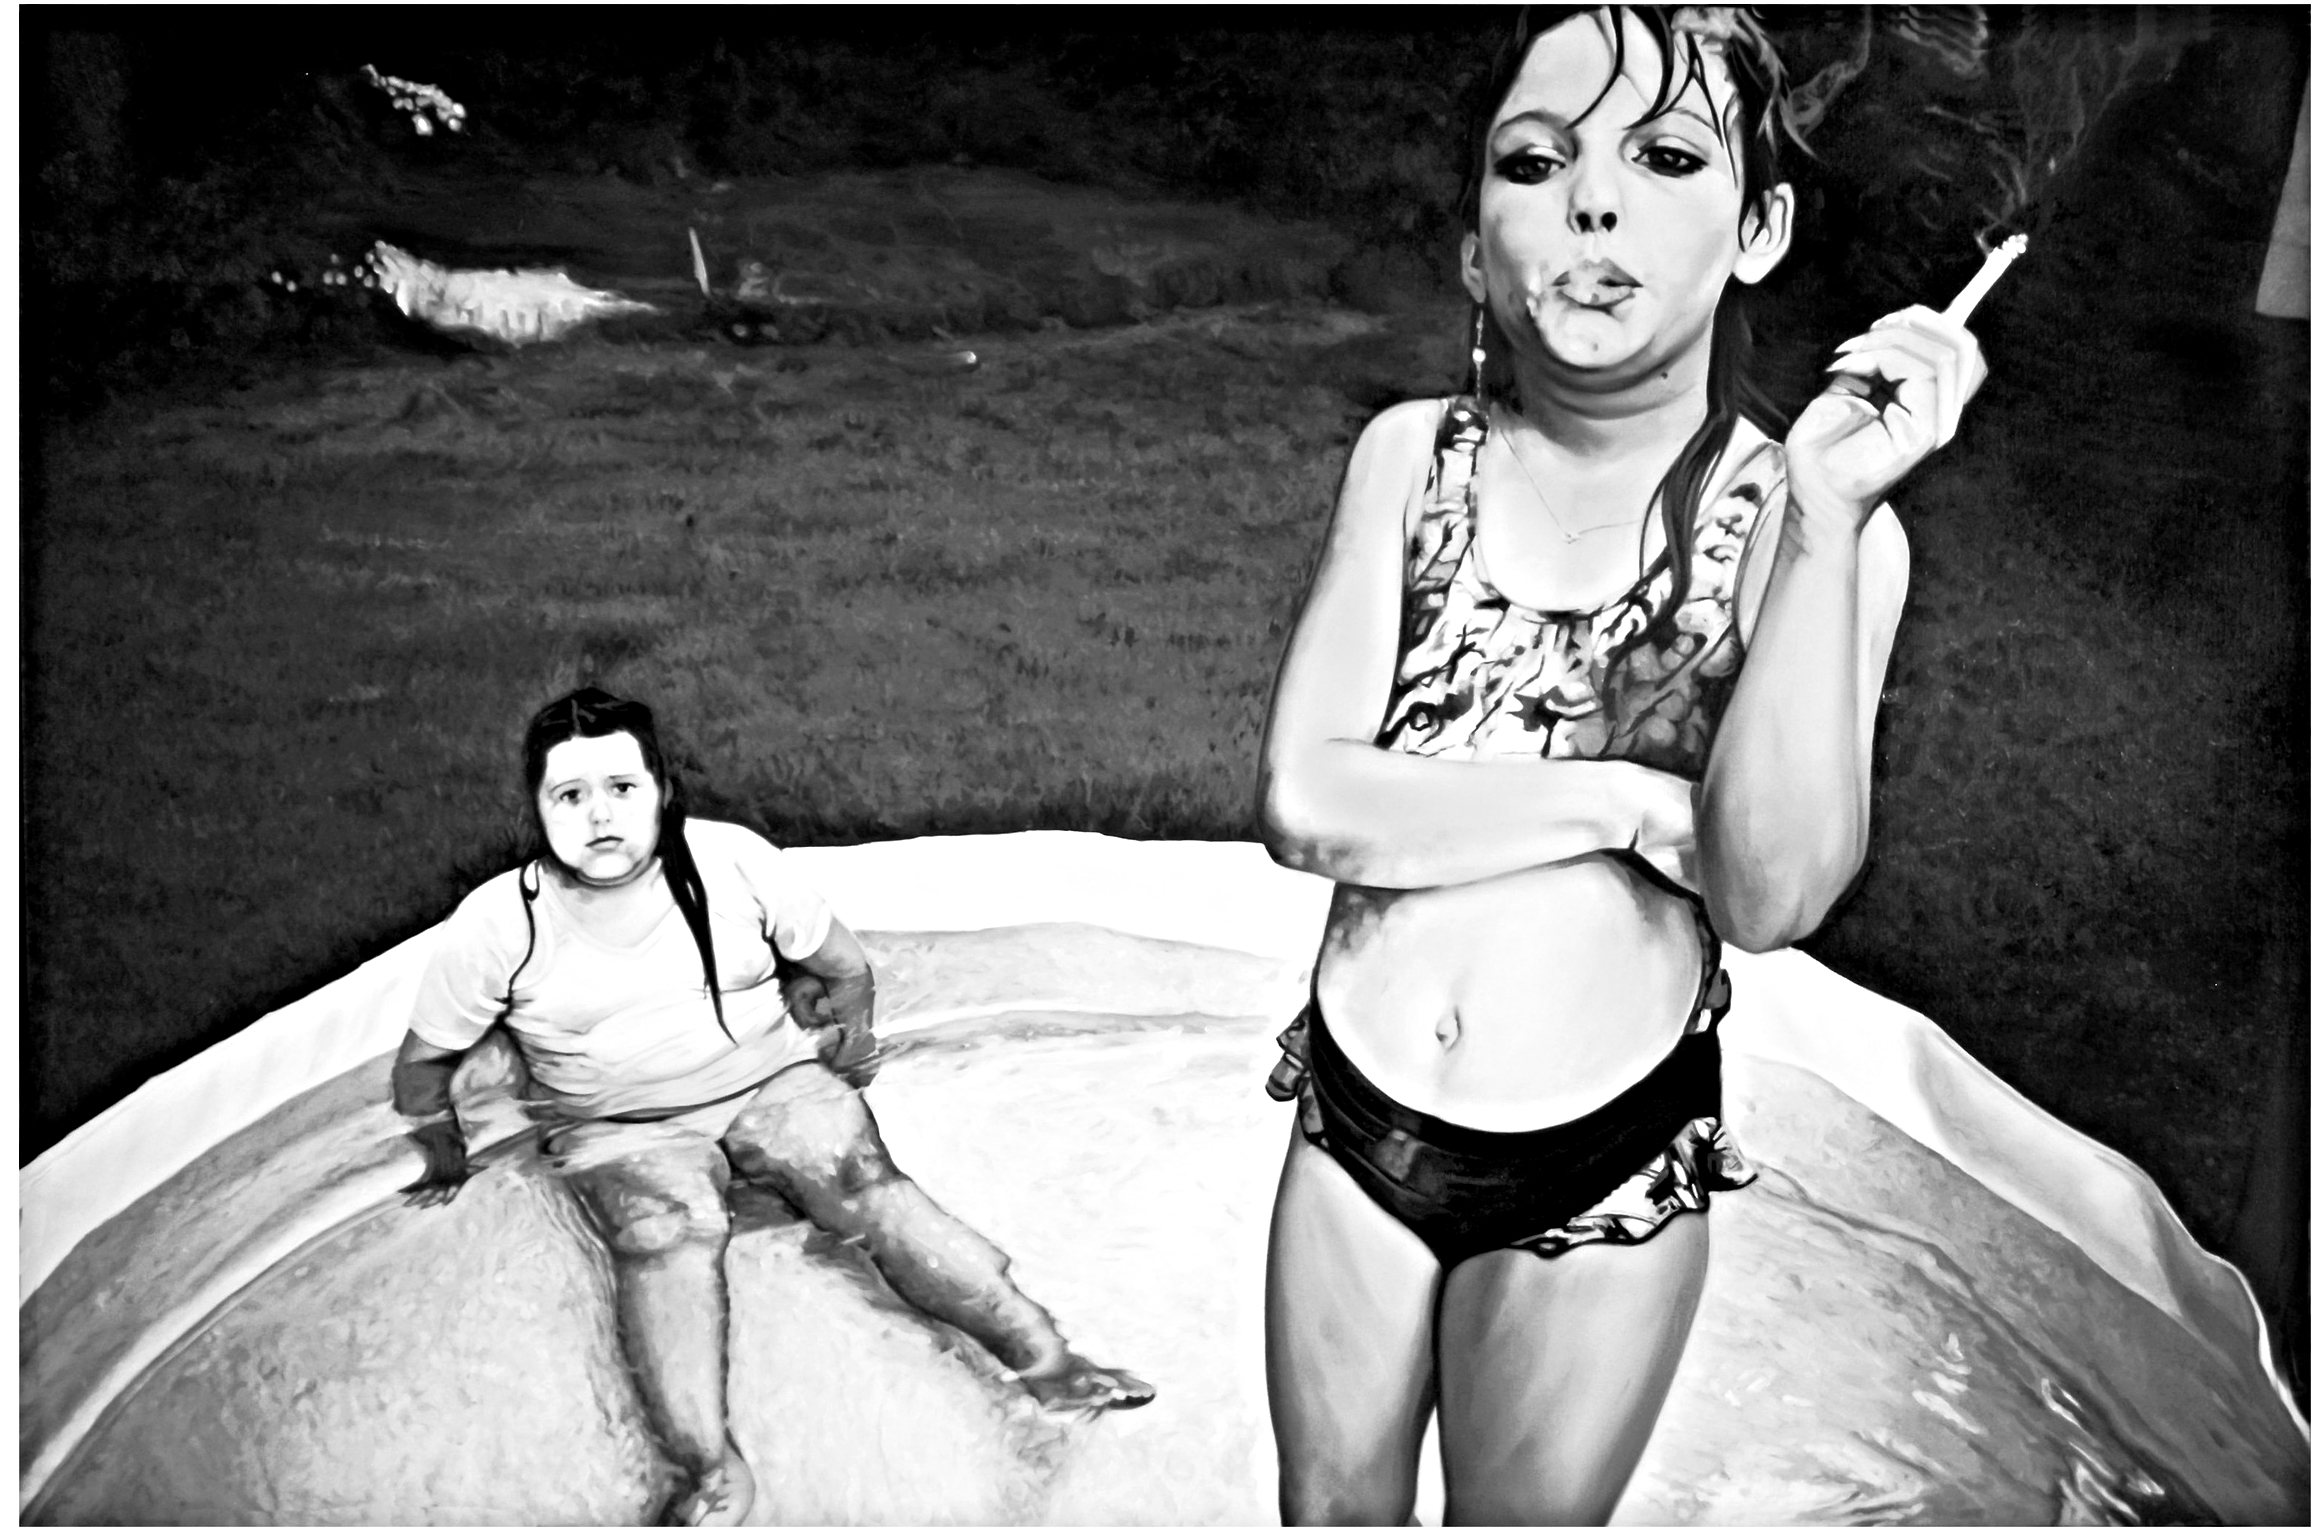 Amanda and Her Cousin Amy, Valdese (Photo by Mary Ellen Mark 1990)